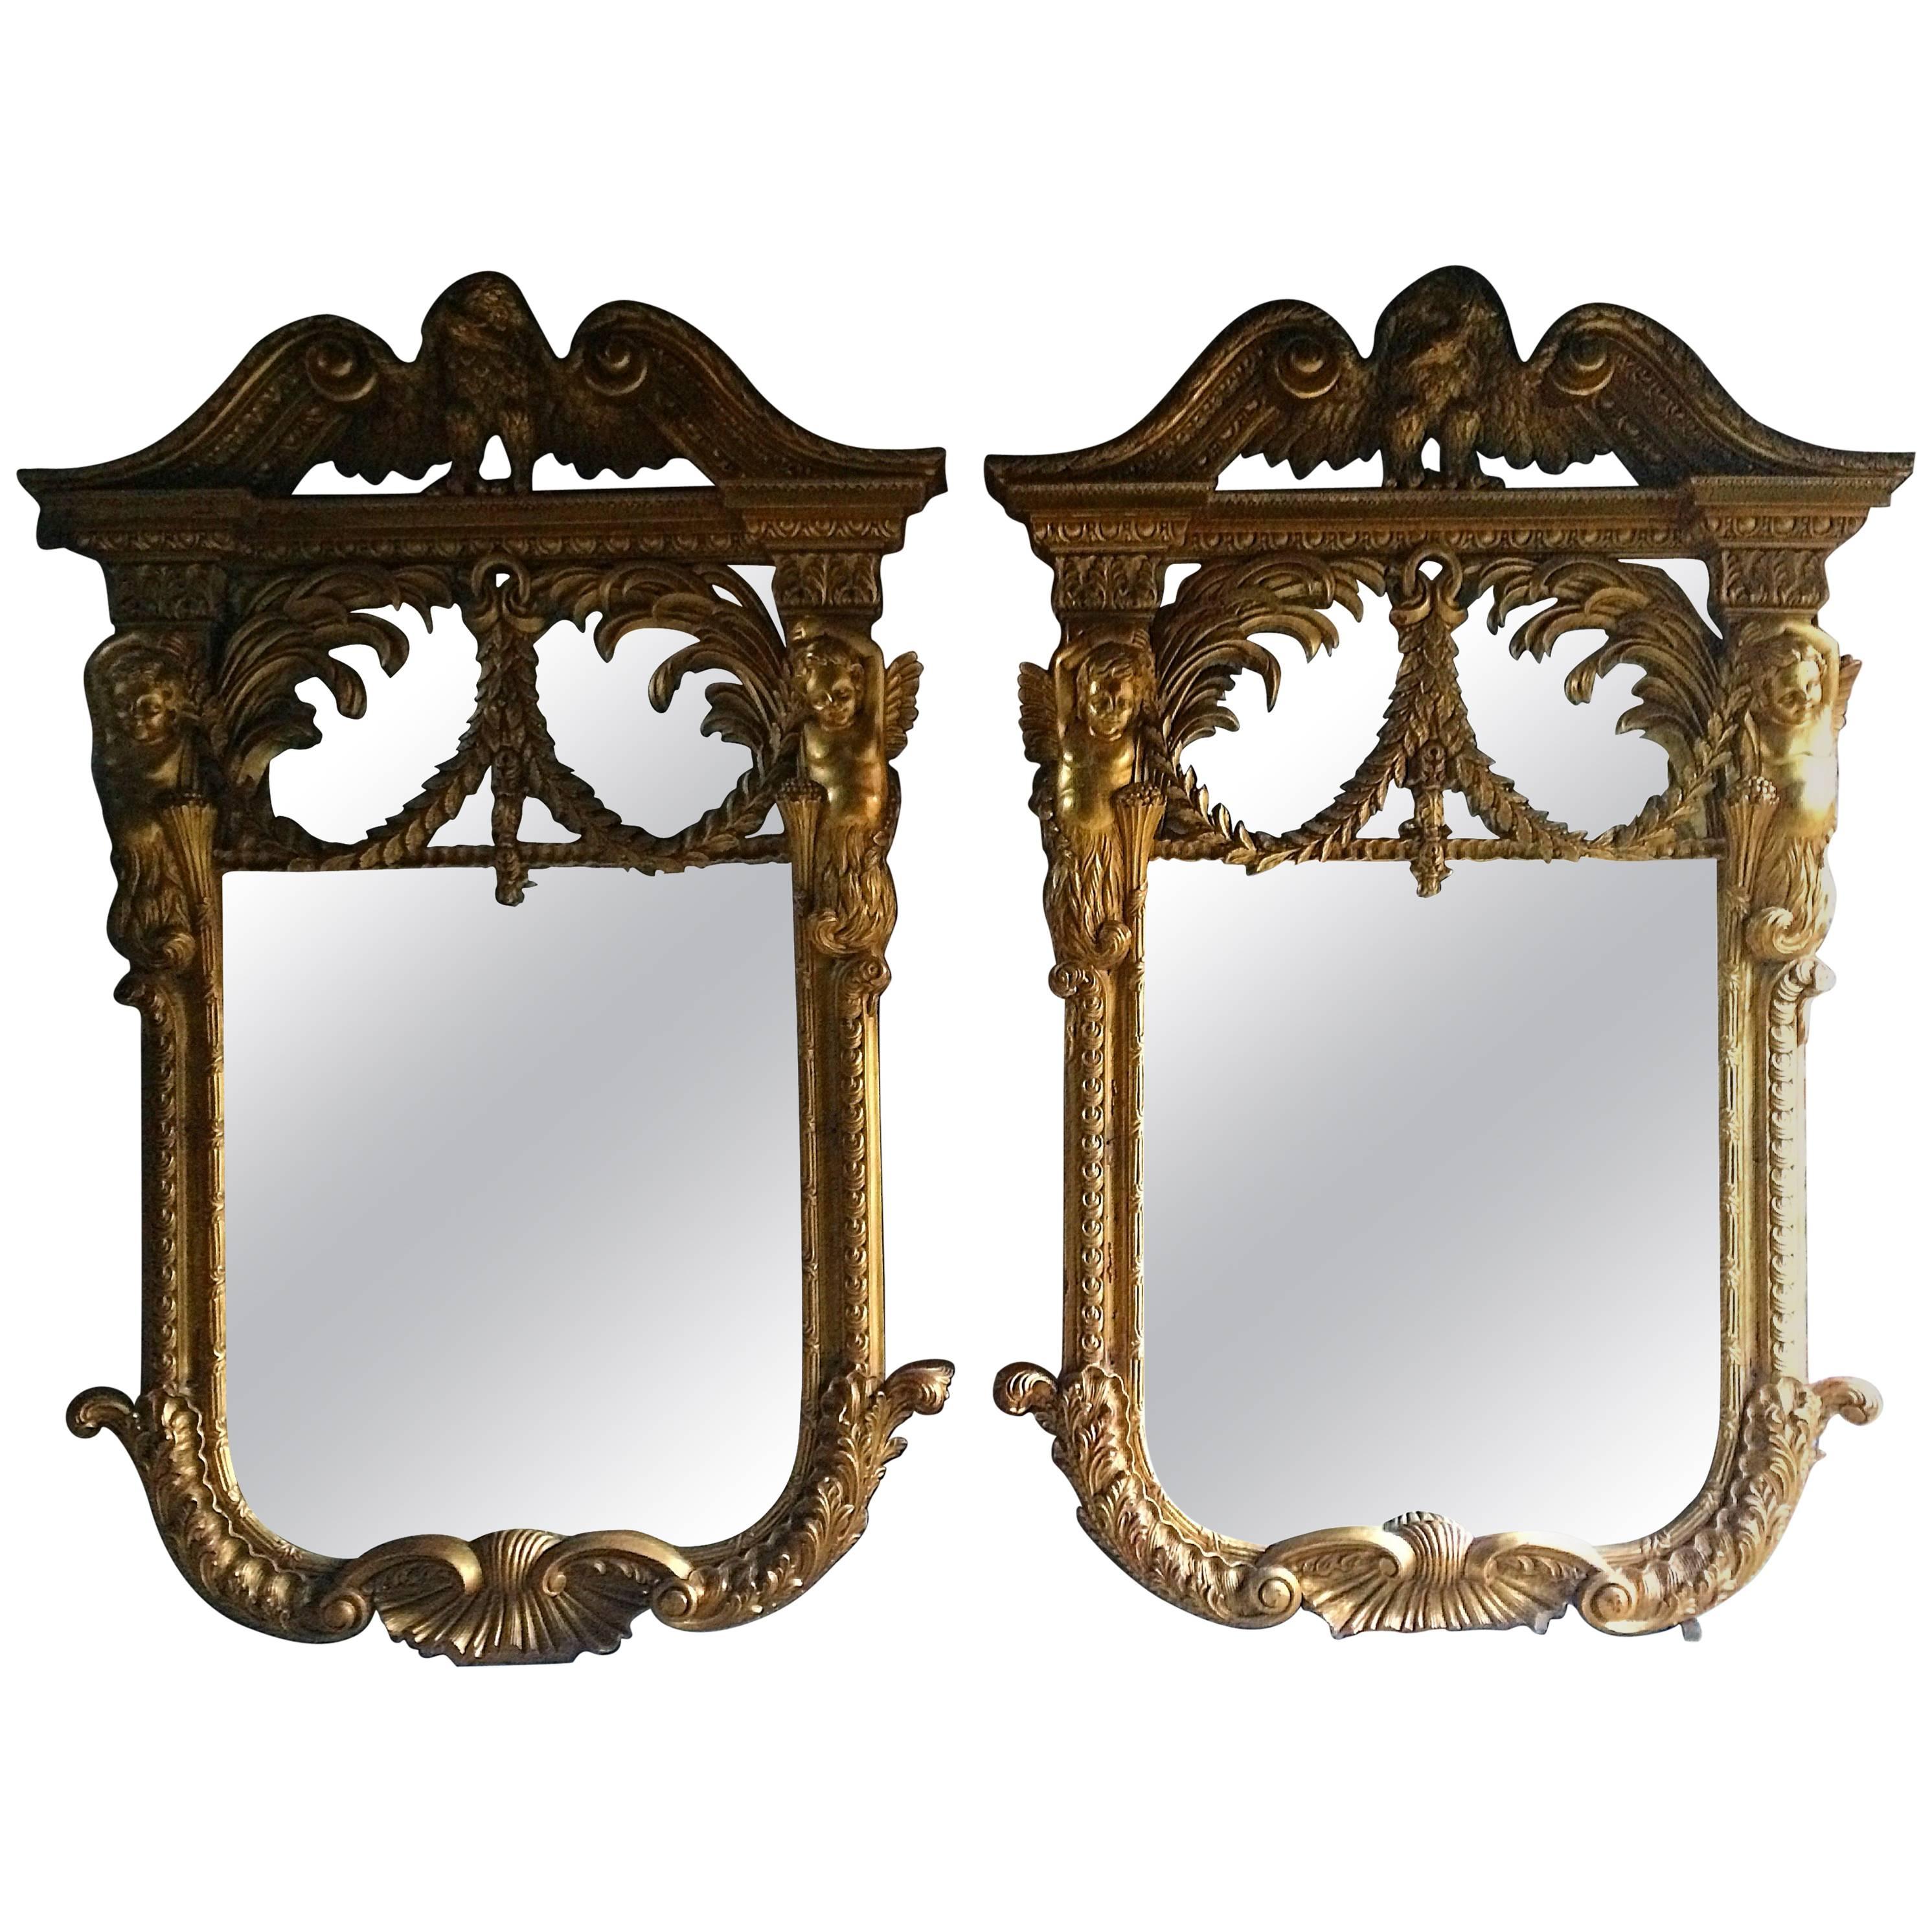 Pair of William Kent Wall Mirrors French Giltwood Very Large Rococo For Sale